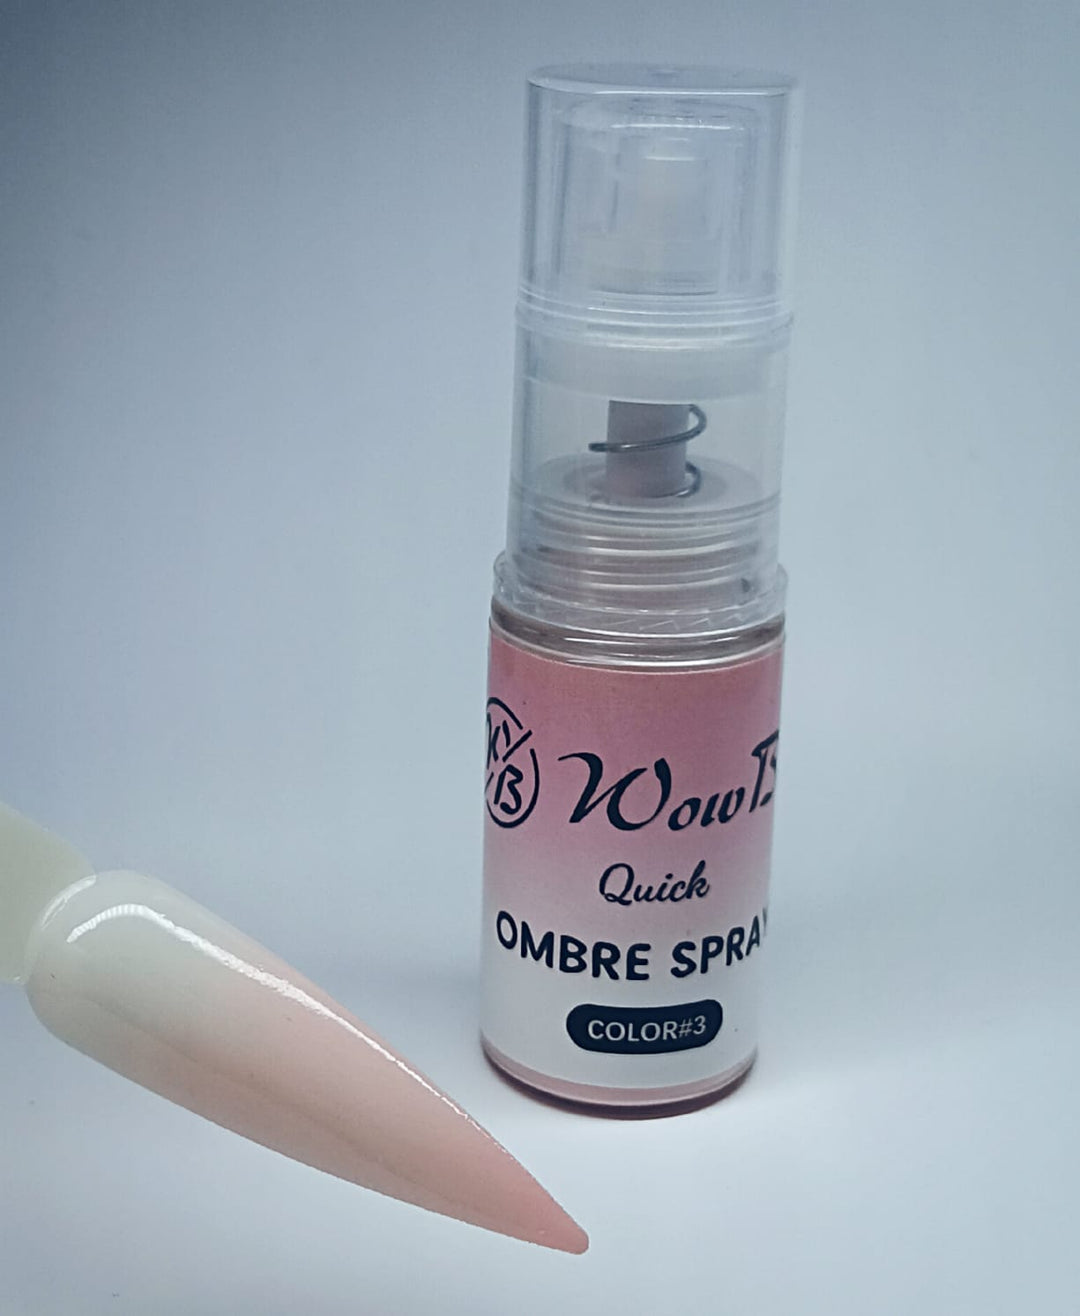 WowBao Nails Quick Ombre Spray - Nude 04